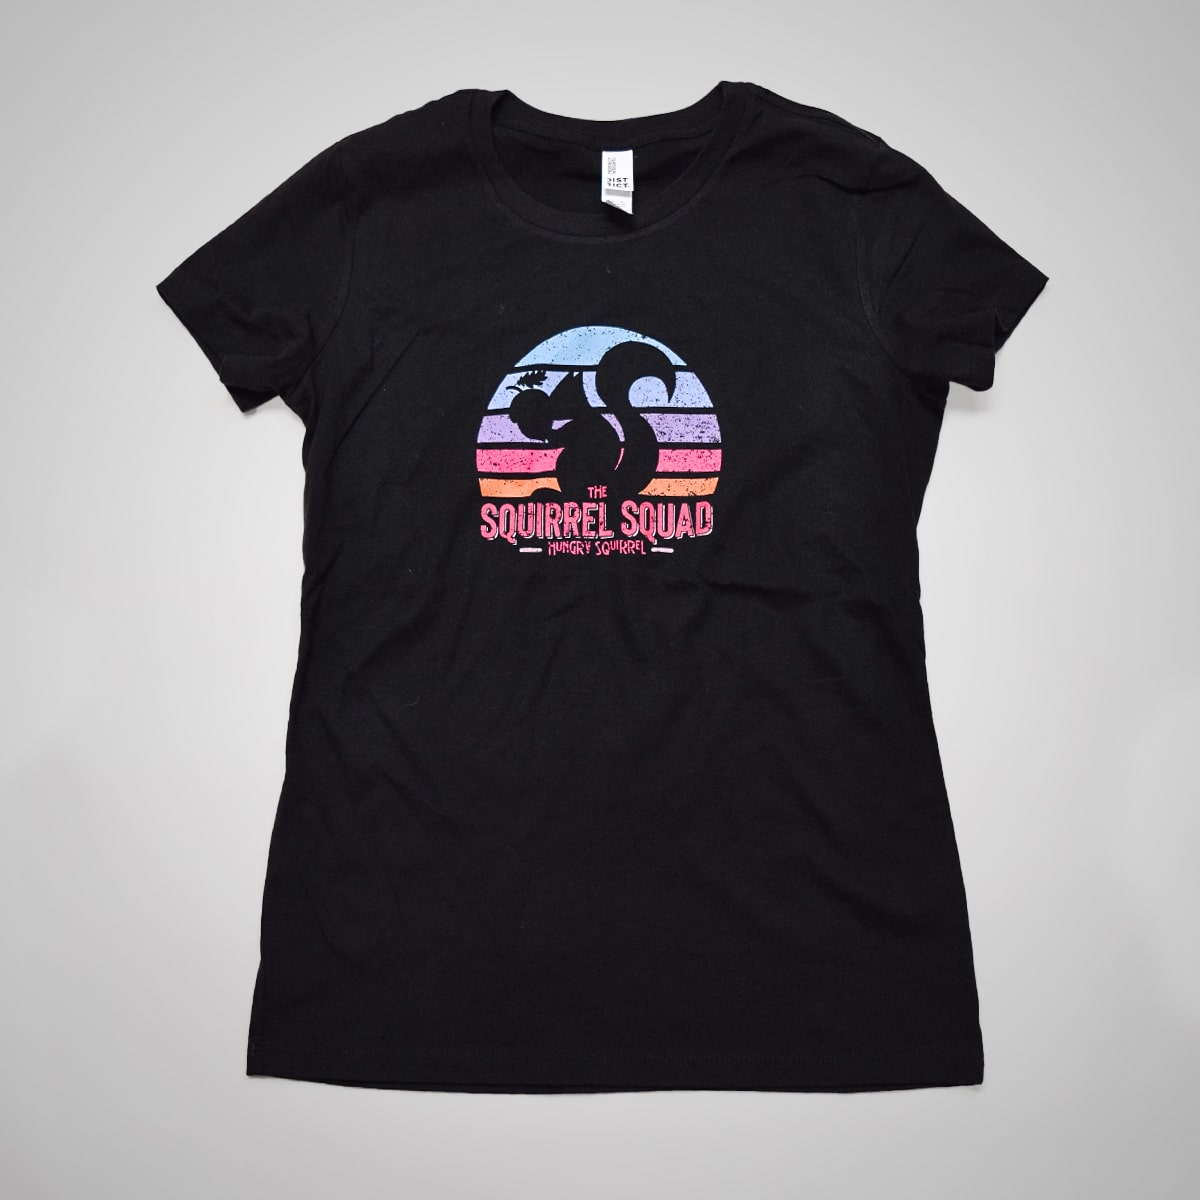 Women's Style T-Shirt in Black with Squirrel Squad theme logo 